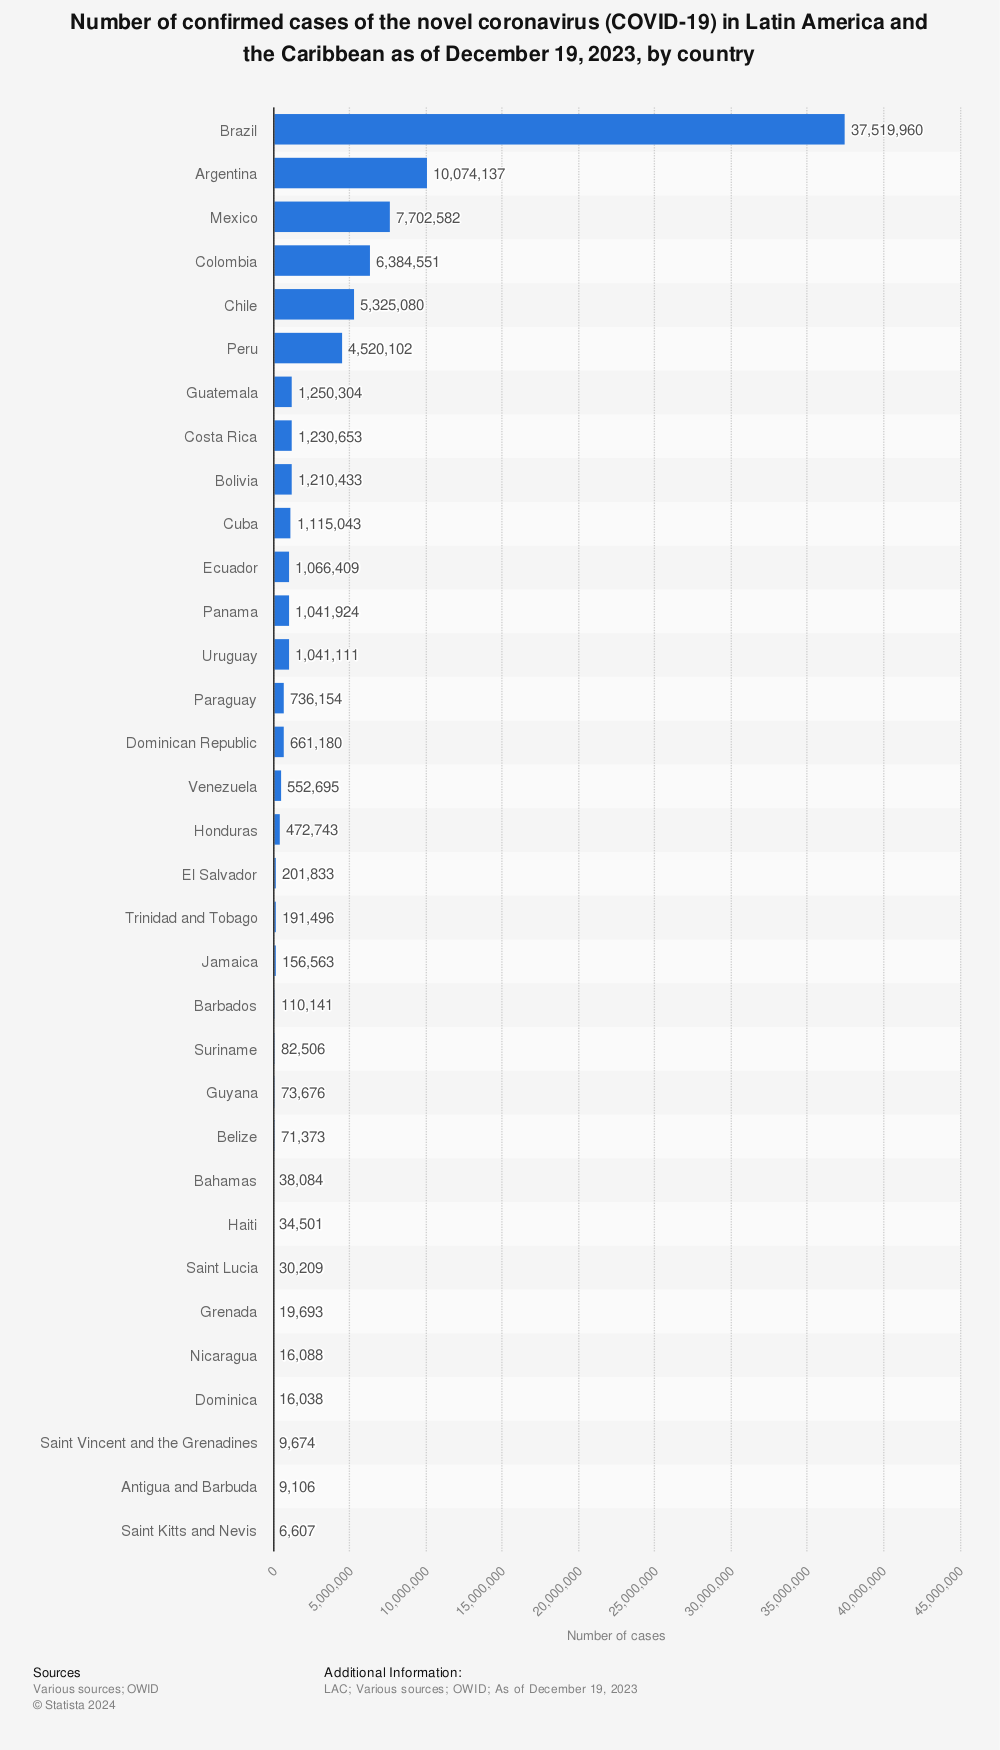 Statistic: Number of confirmed cases of novel coronavirus (COVID-19) in Latin America and the Caribbean as of April 30, 2020, by country | Statista